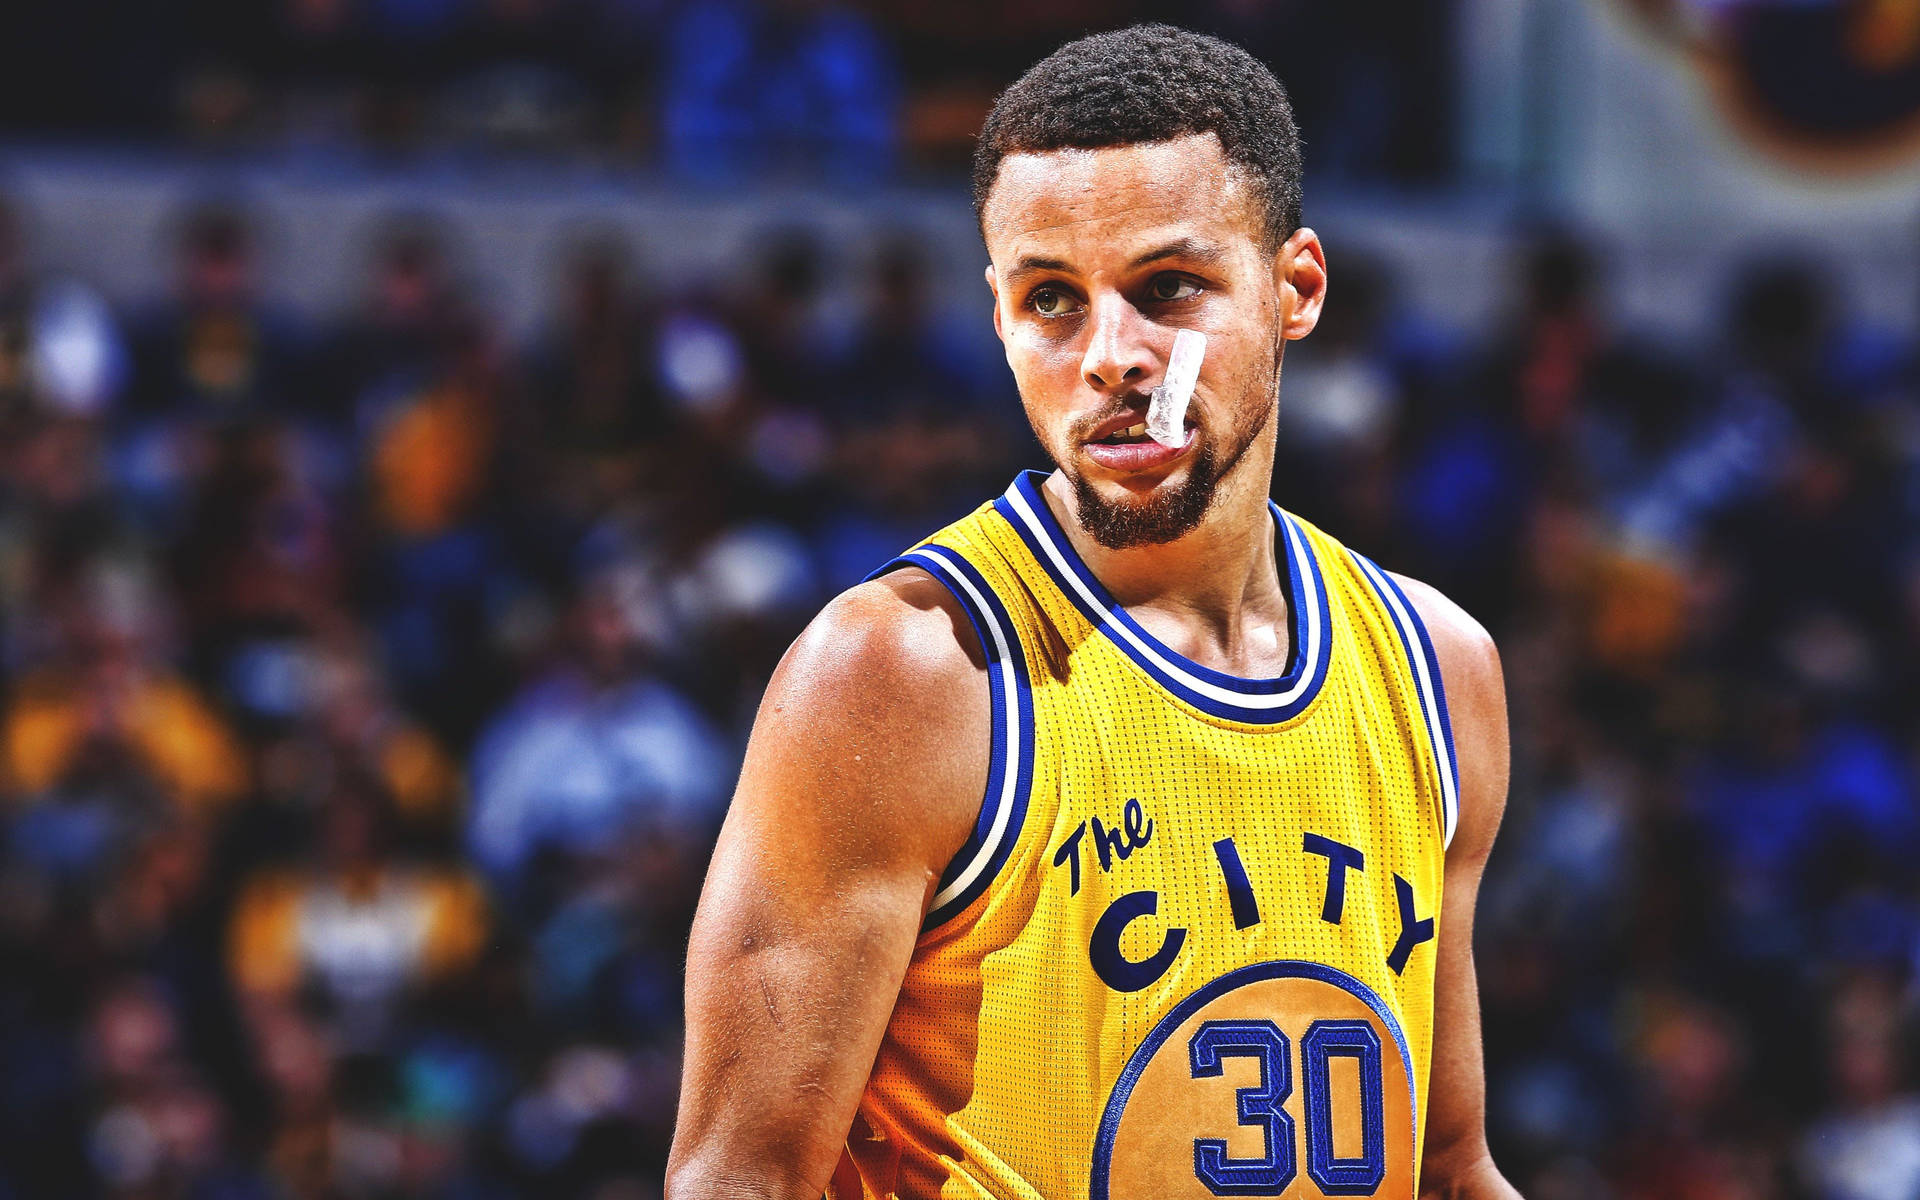 4k Nba Steph Curry In Yellow Jersey Background